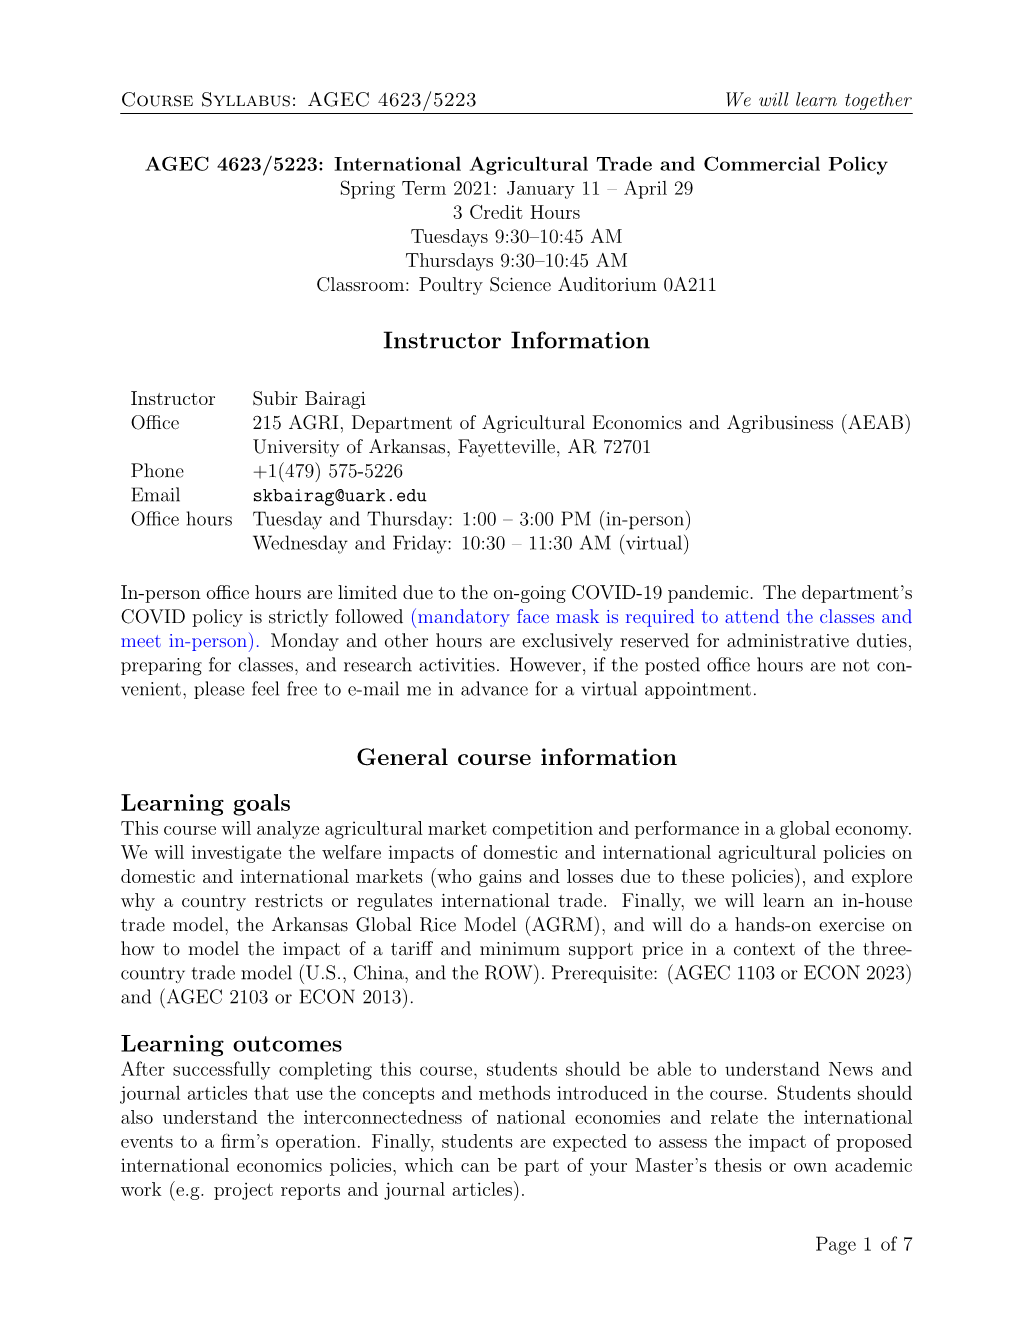 Instructor Information General Course Information Learning Goals Learning Outcomes